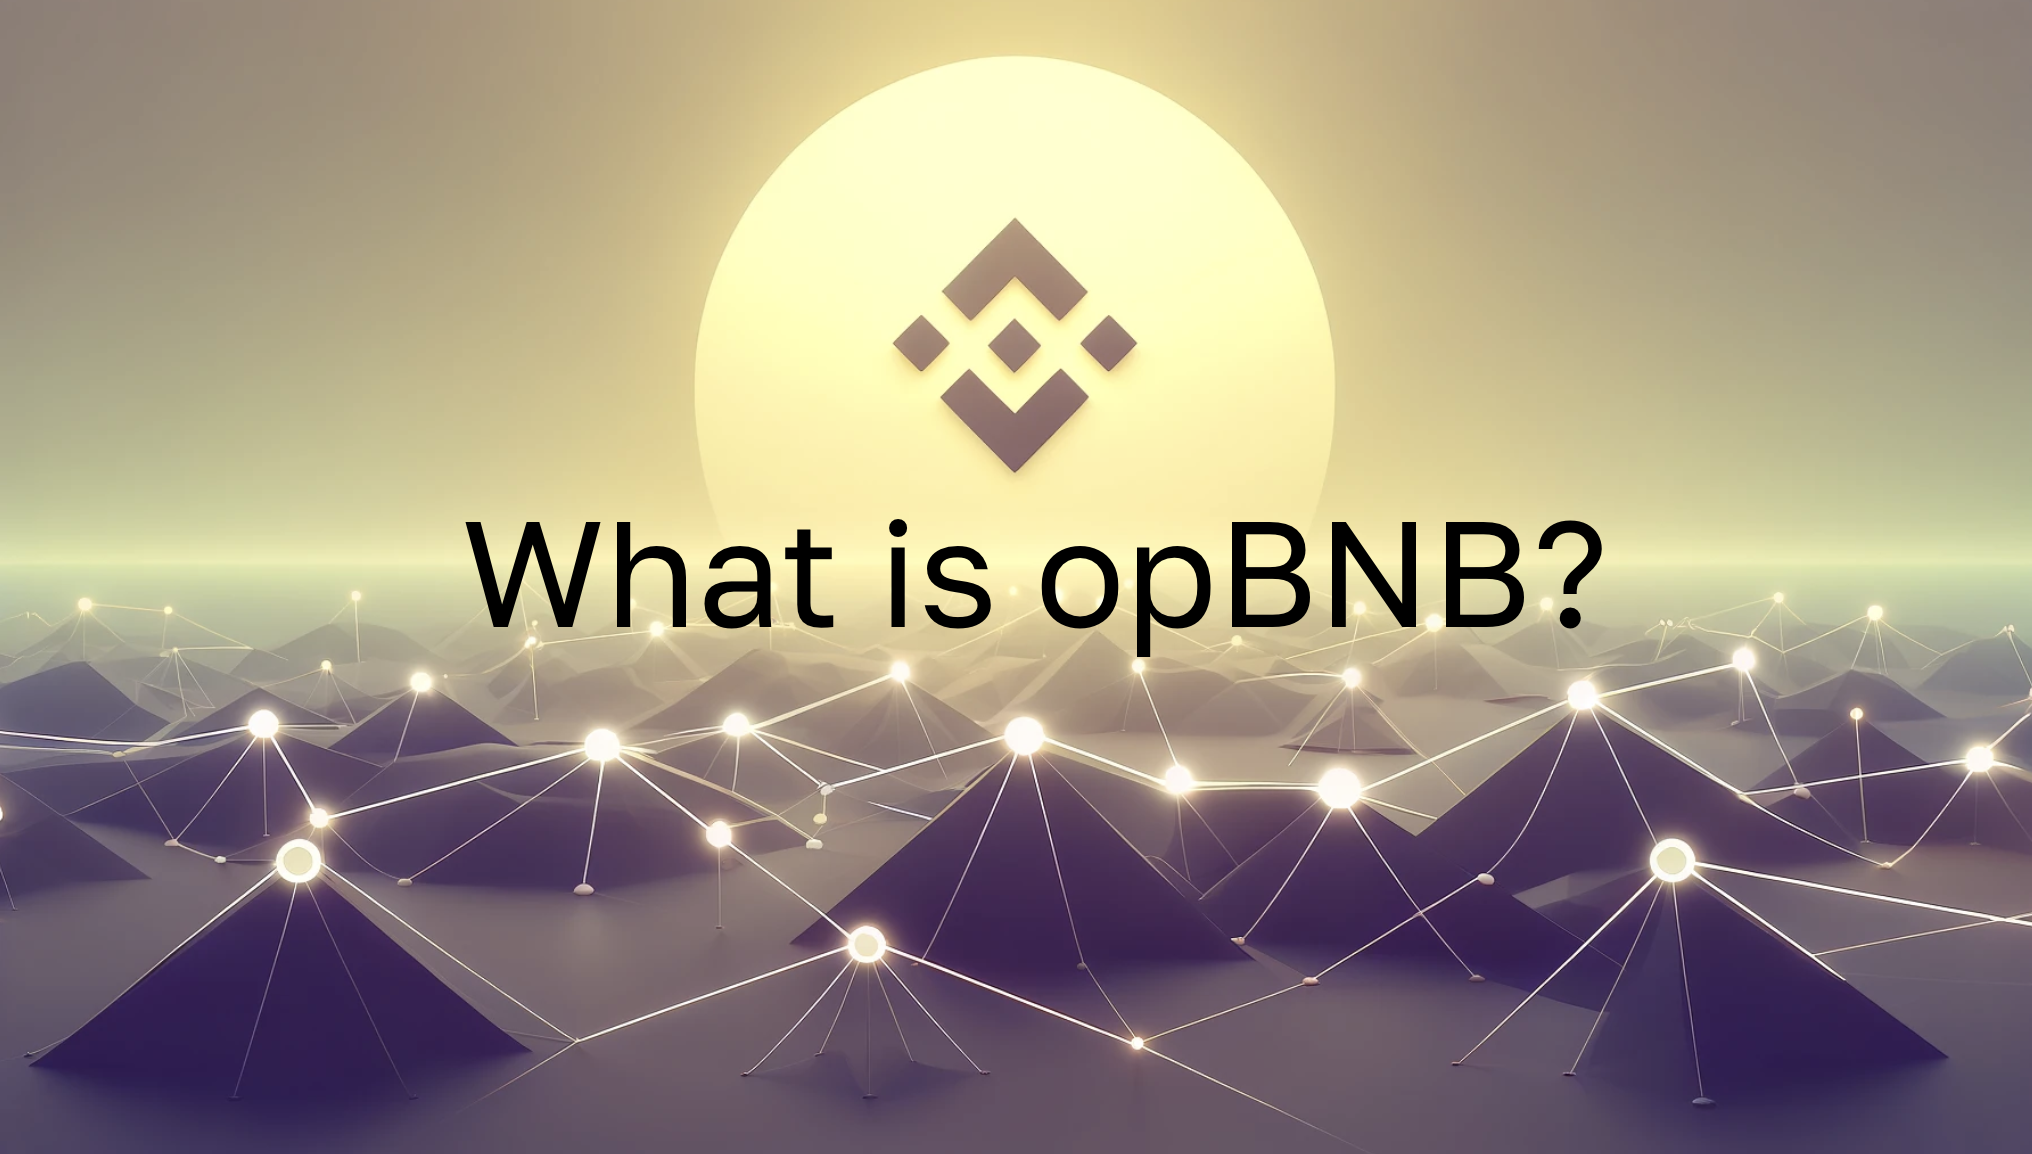 Text: "What is opBNB?"